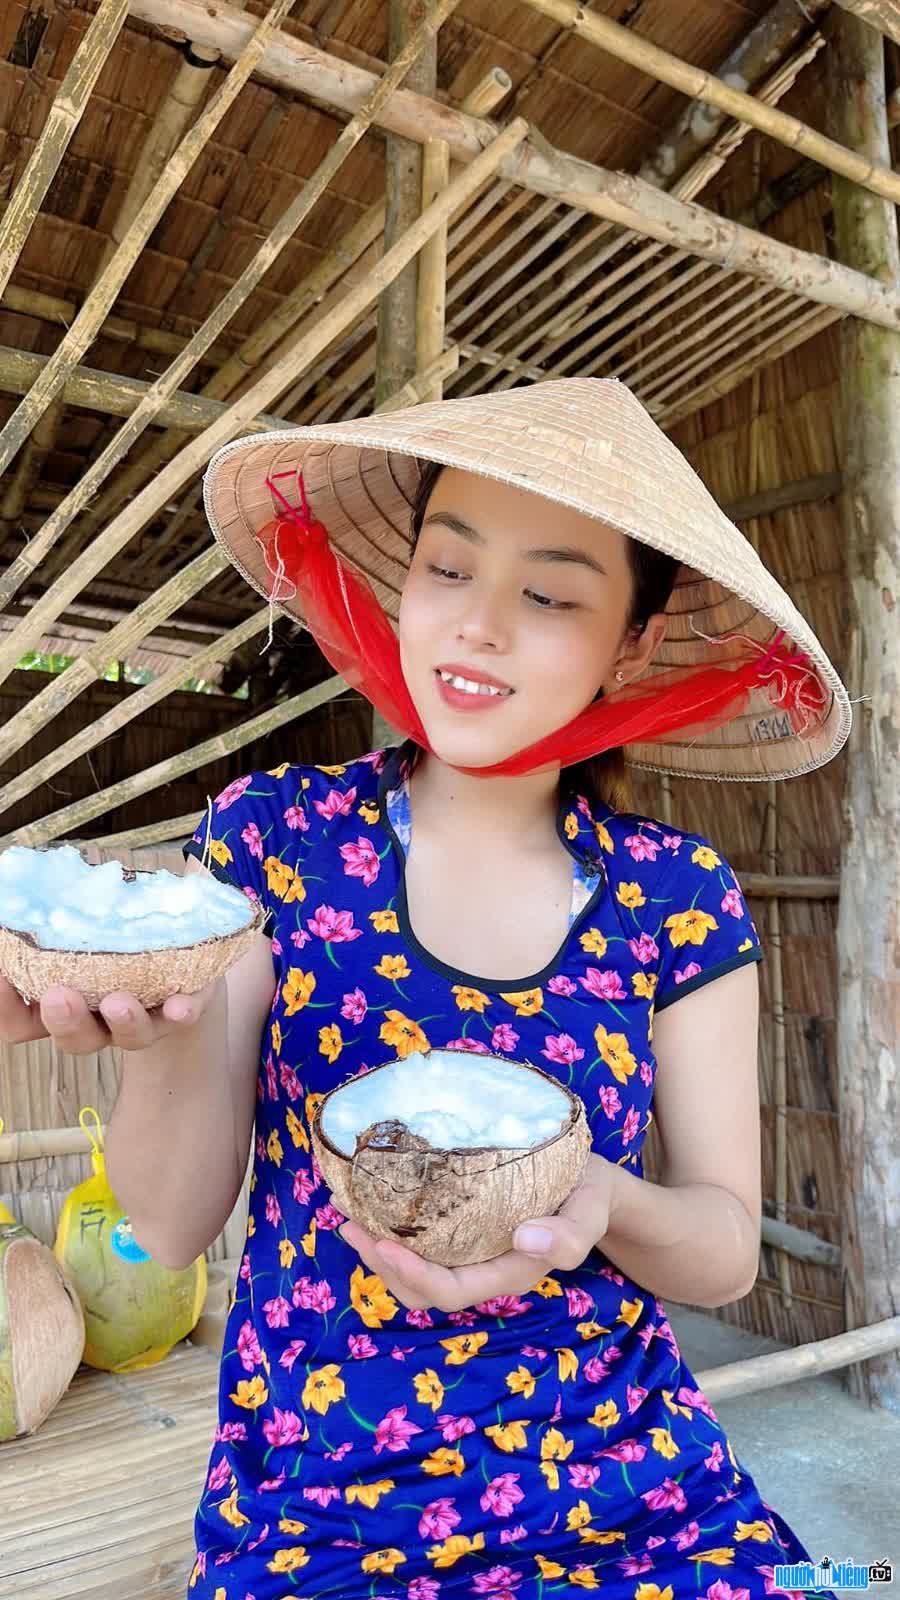 Huyen Phi stands out with the image of wearing a military uniform with a conical hat